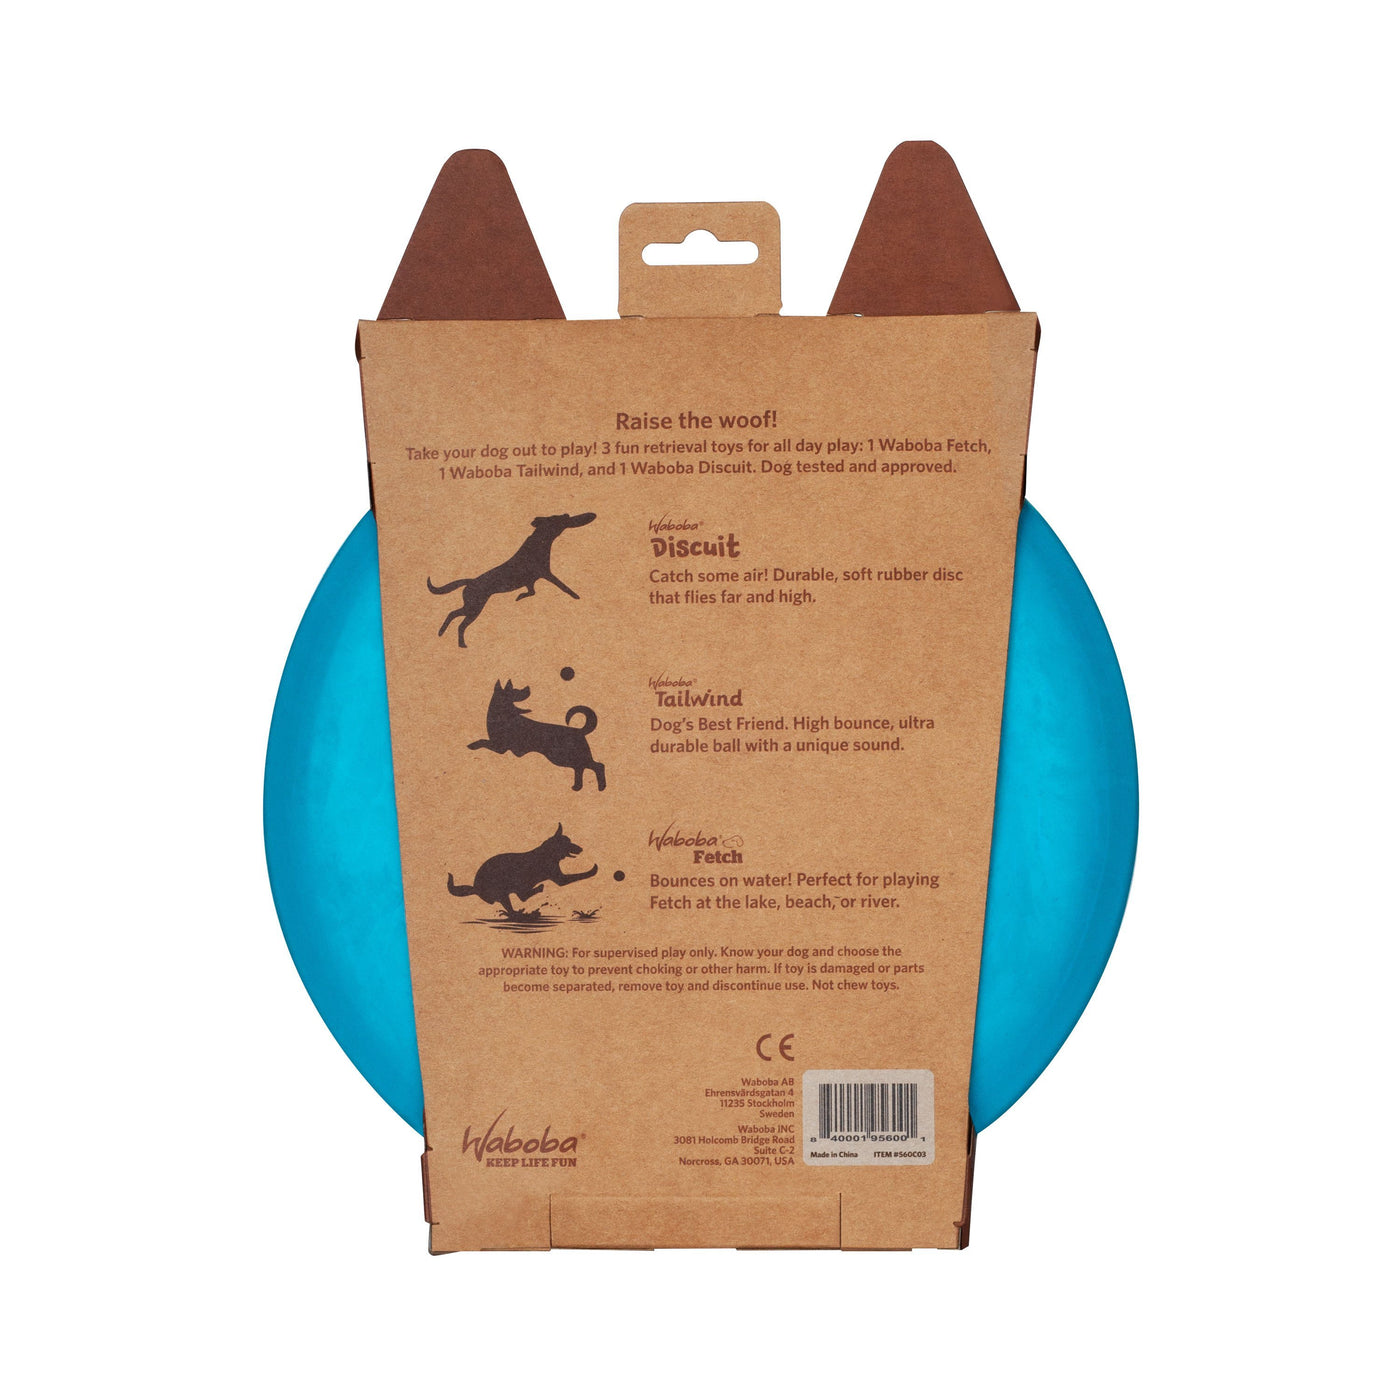 Enjoy Dog toys with Waboba's Doggy Play Pack